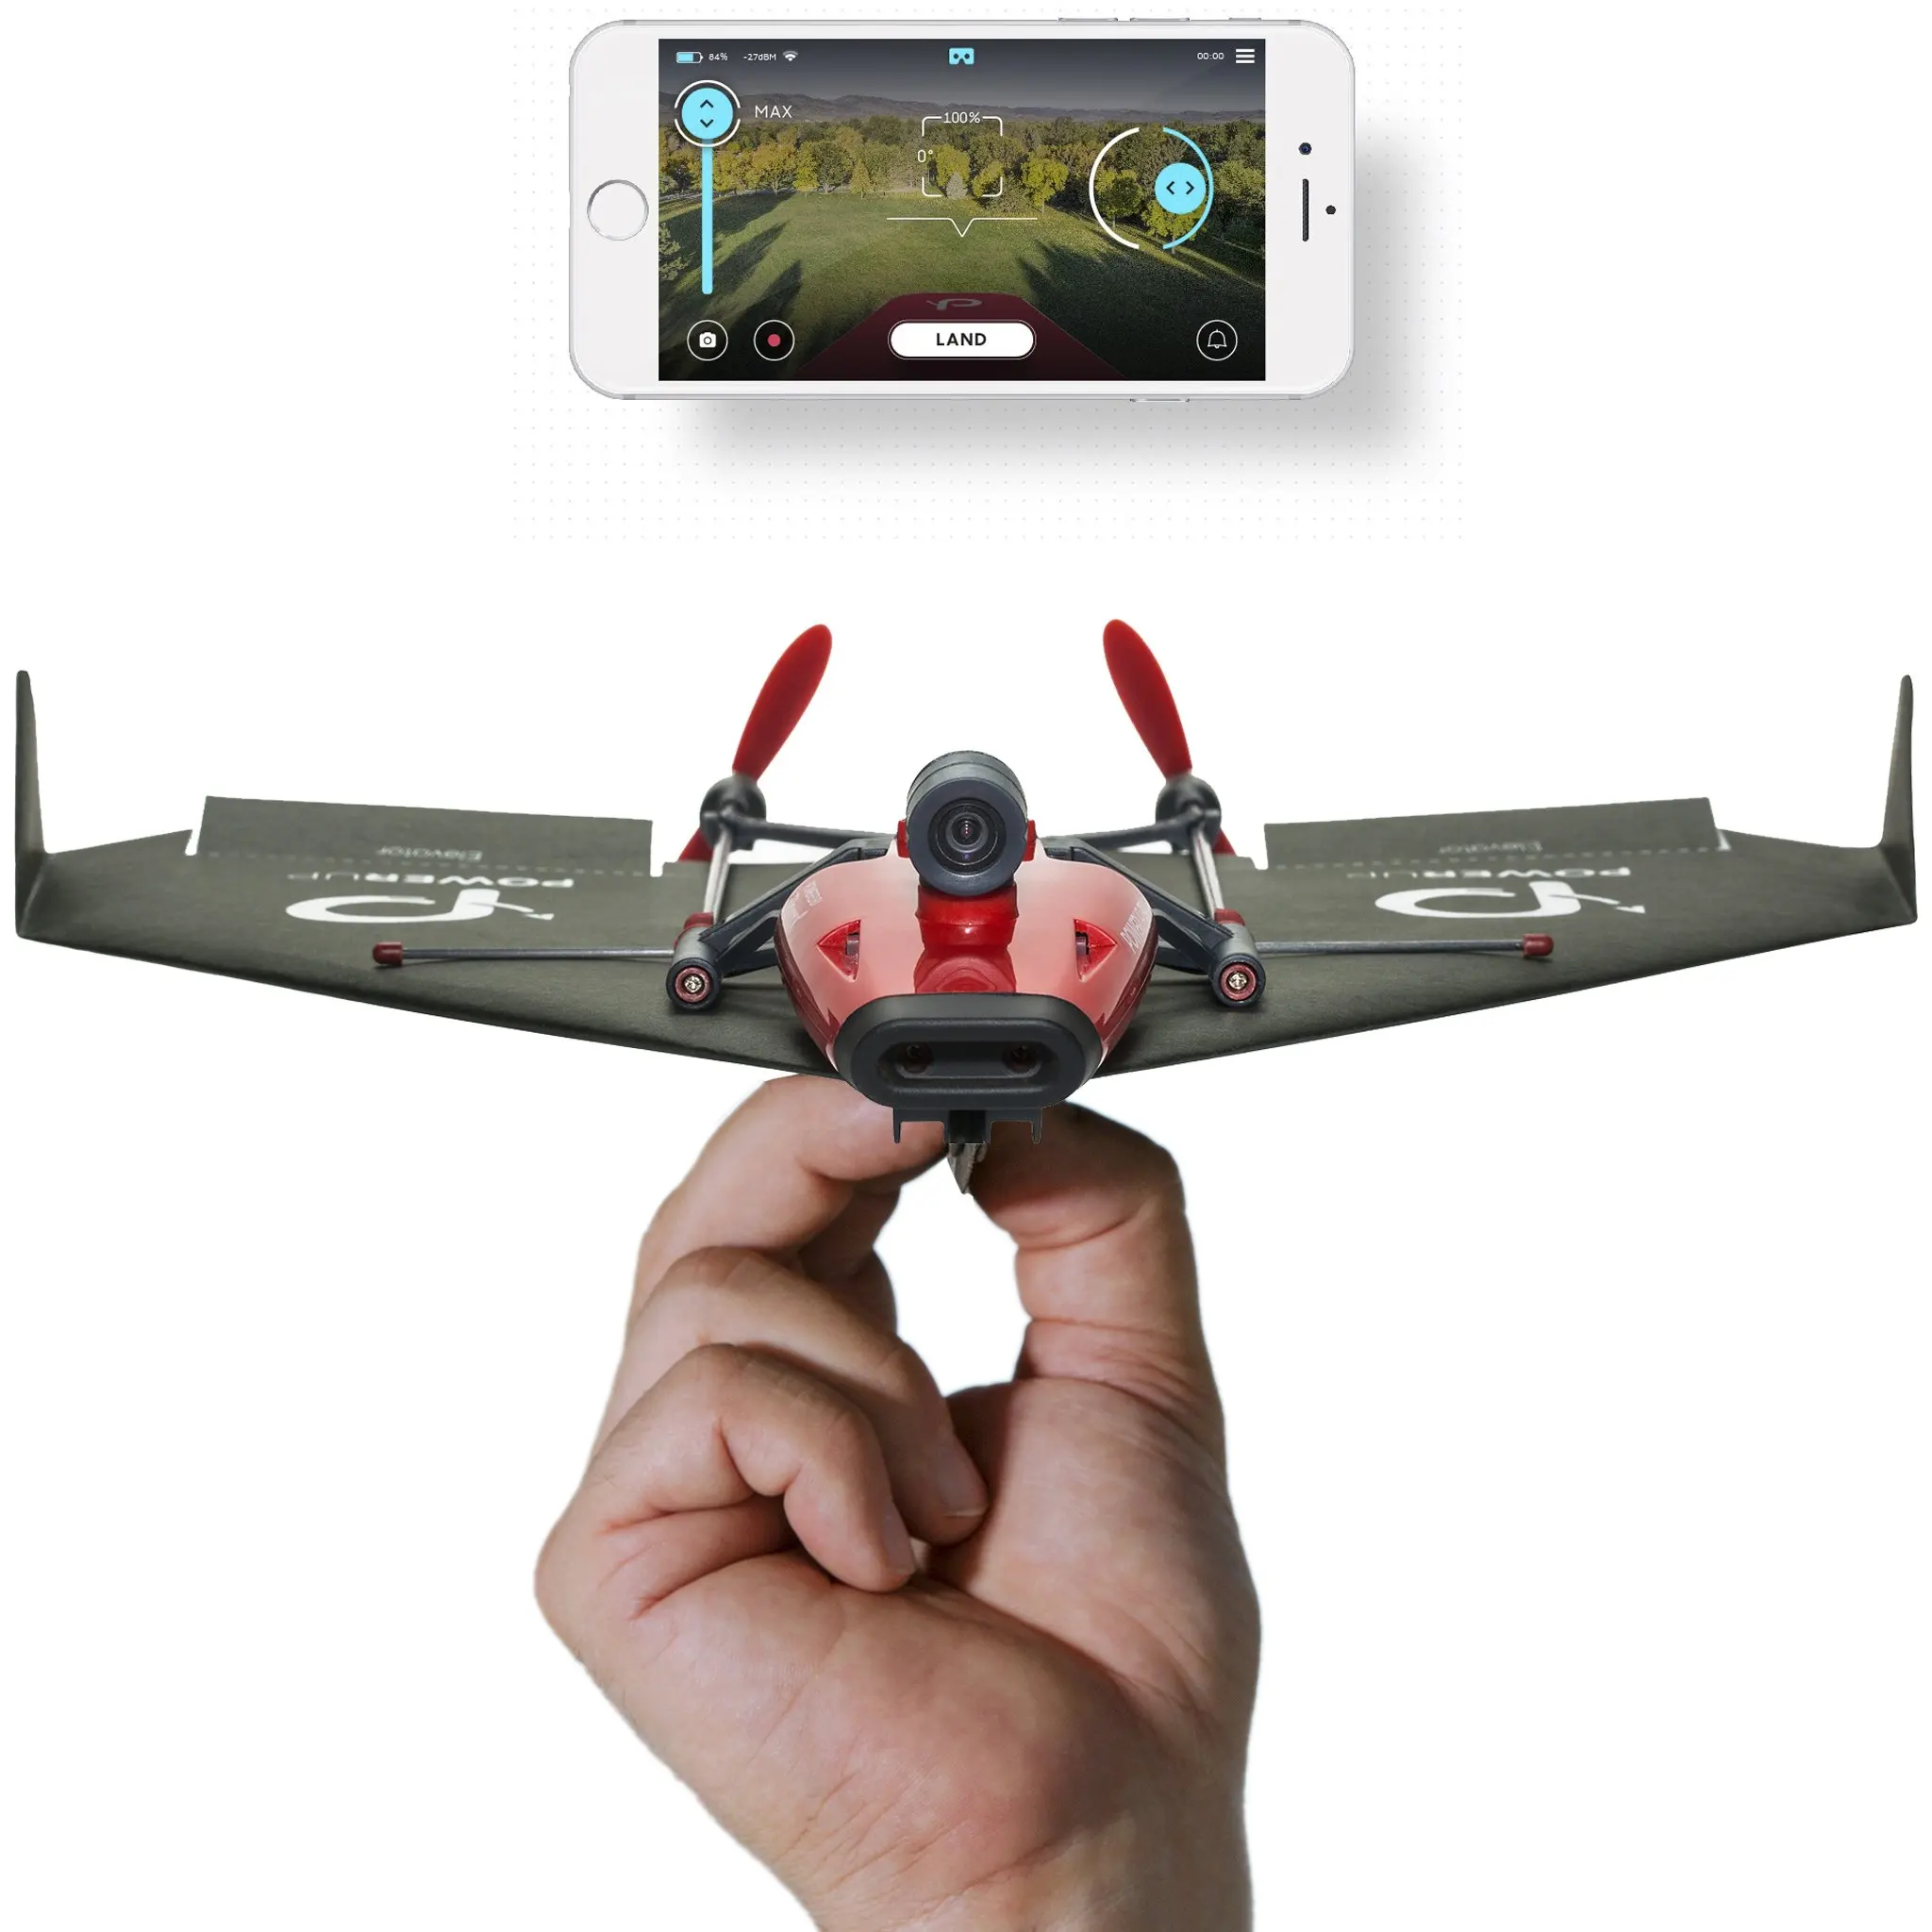 Buy Powerup 3 0 Smartphone Controlled Paper Airplane By Tailor Toys In Cheap Price On